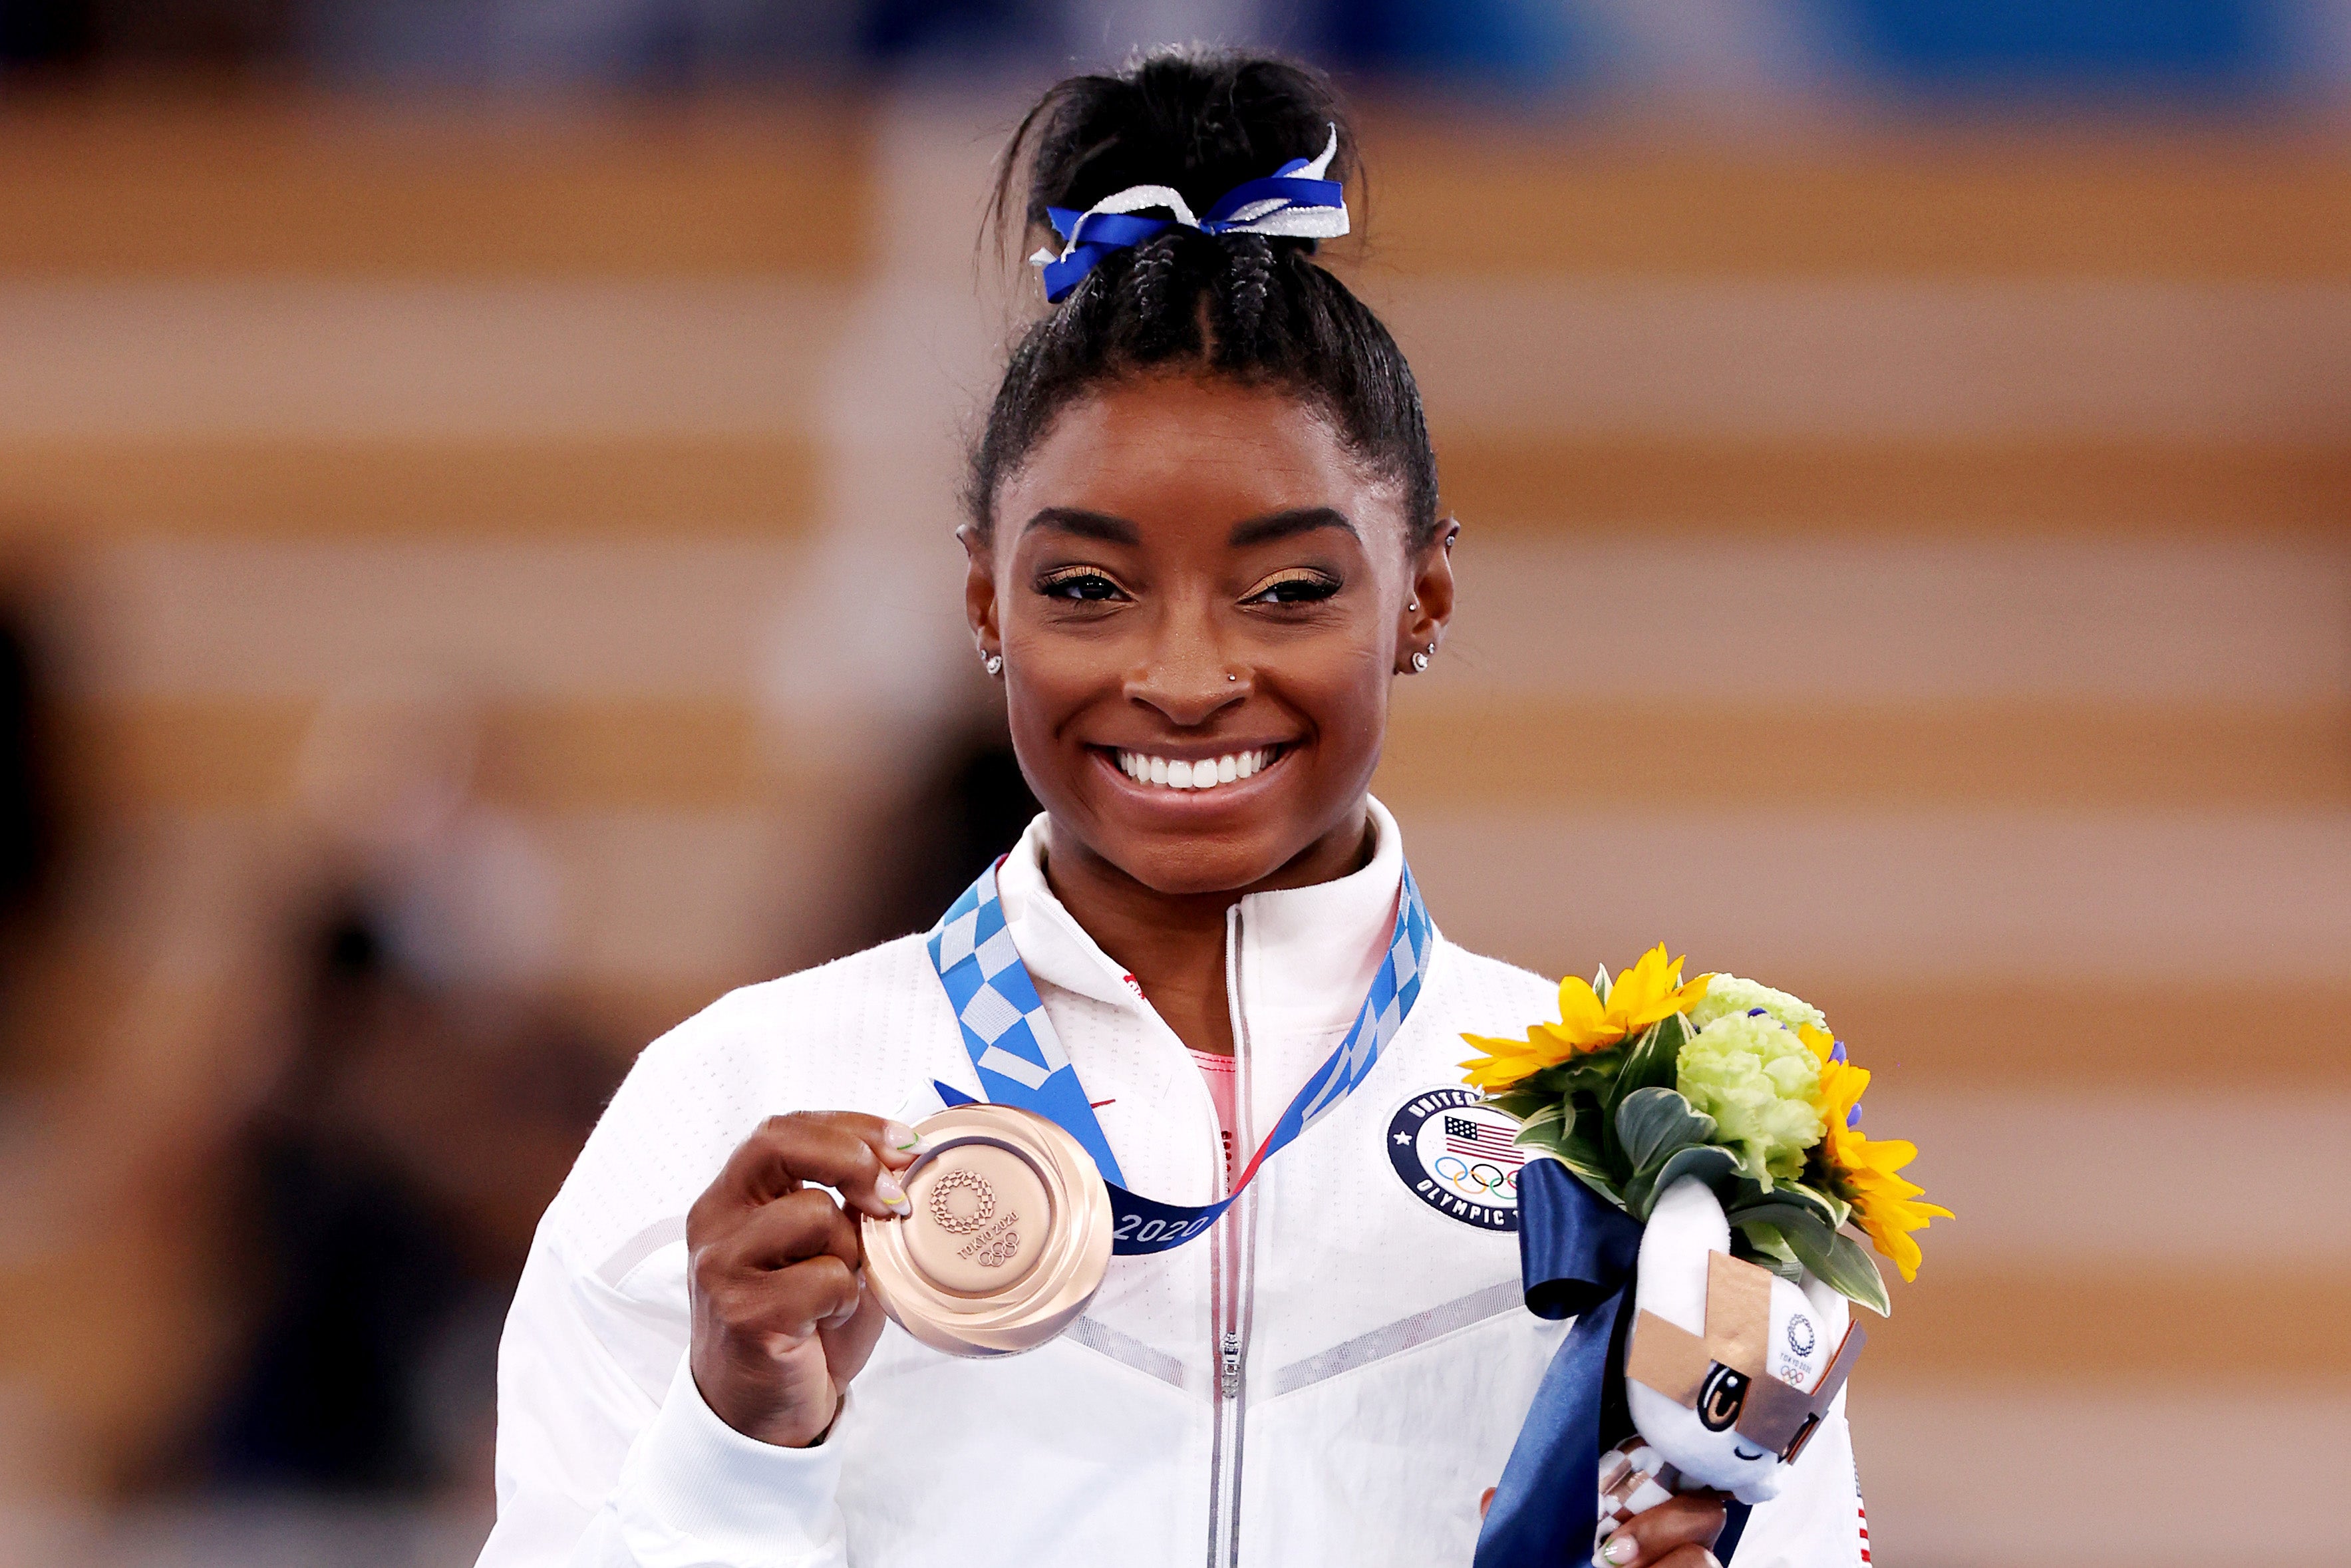 Simone Biles secured an individual bronze medal and a team silver at Tokyo 2020